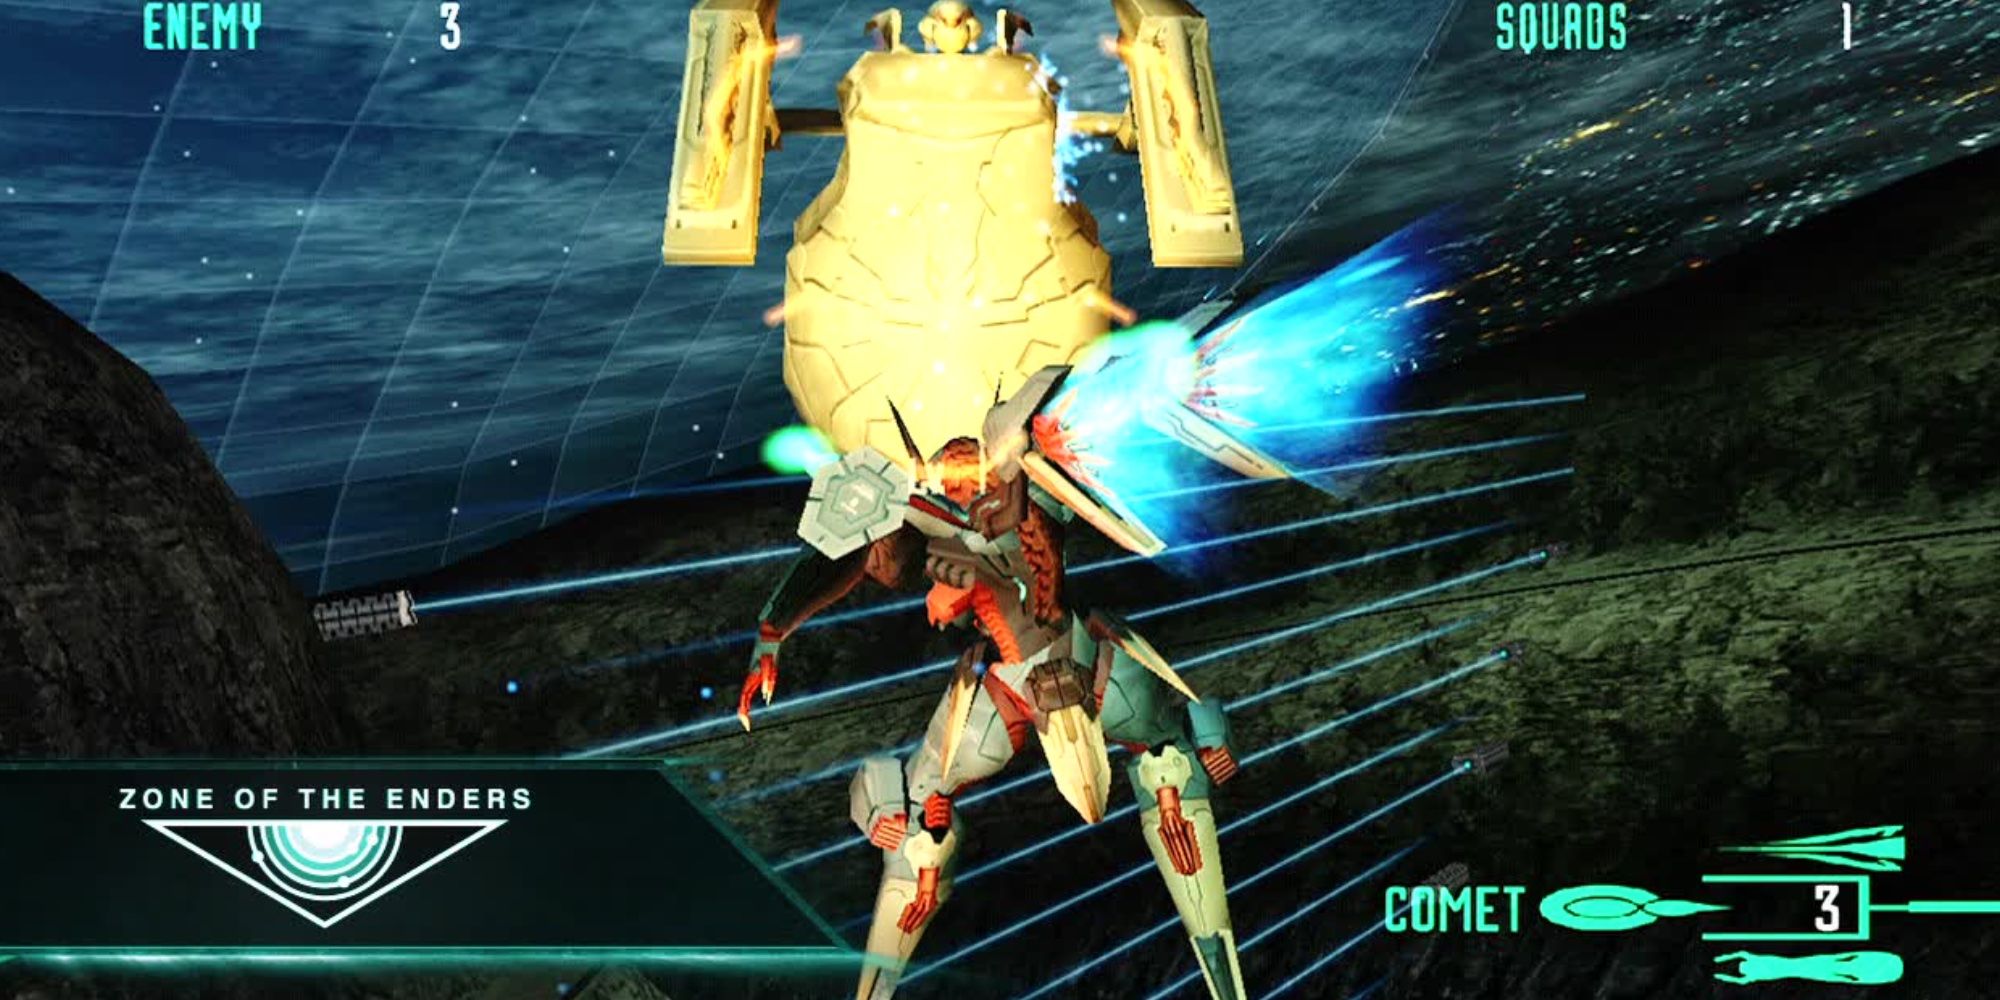 Zone of the Enders HD Collection: Screenshot from gameplay, showing Mecha flying